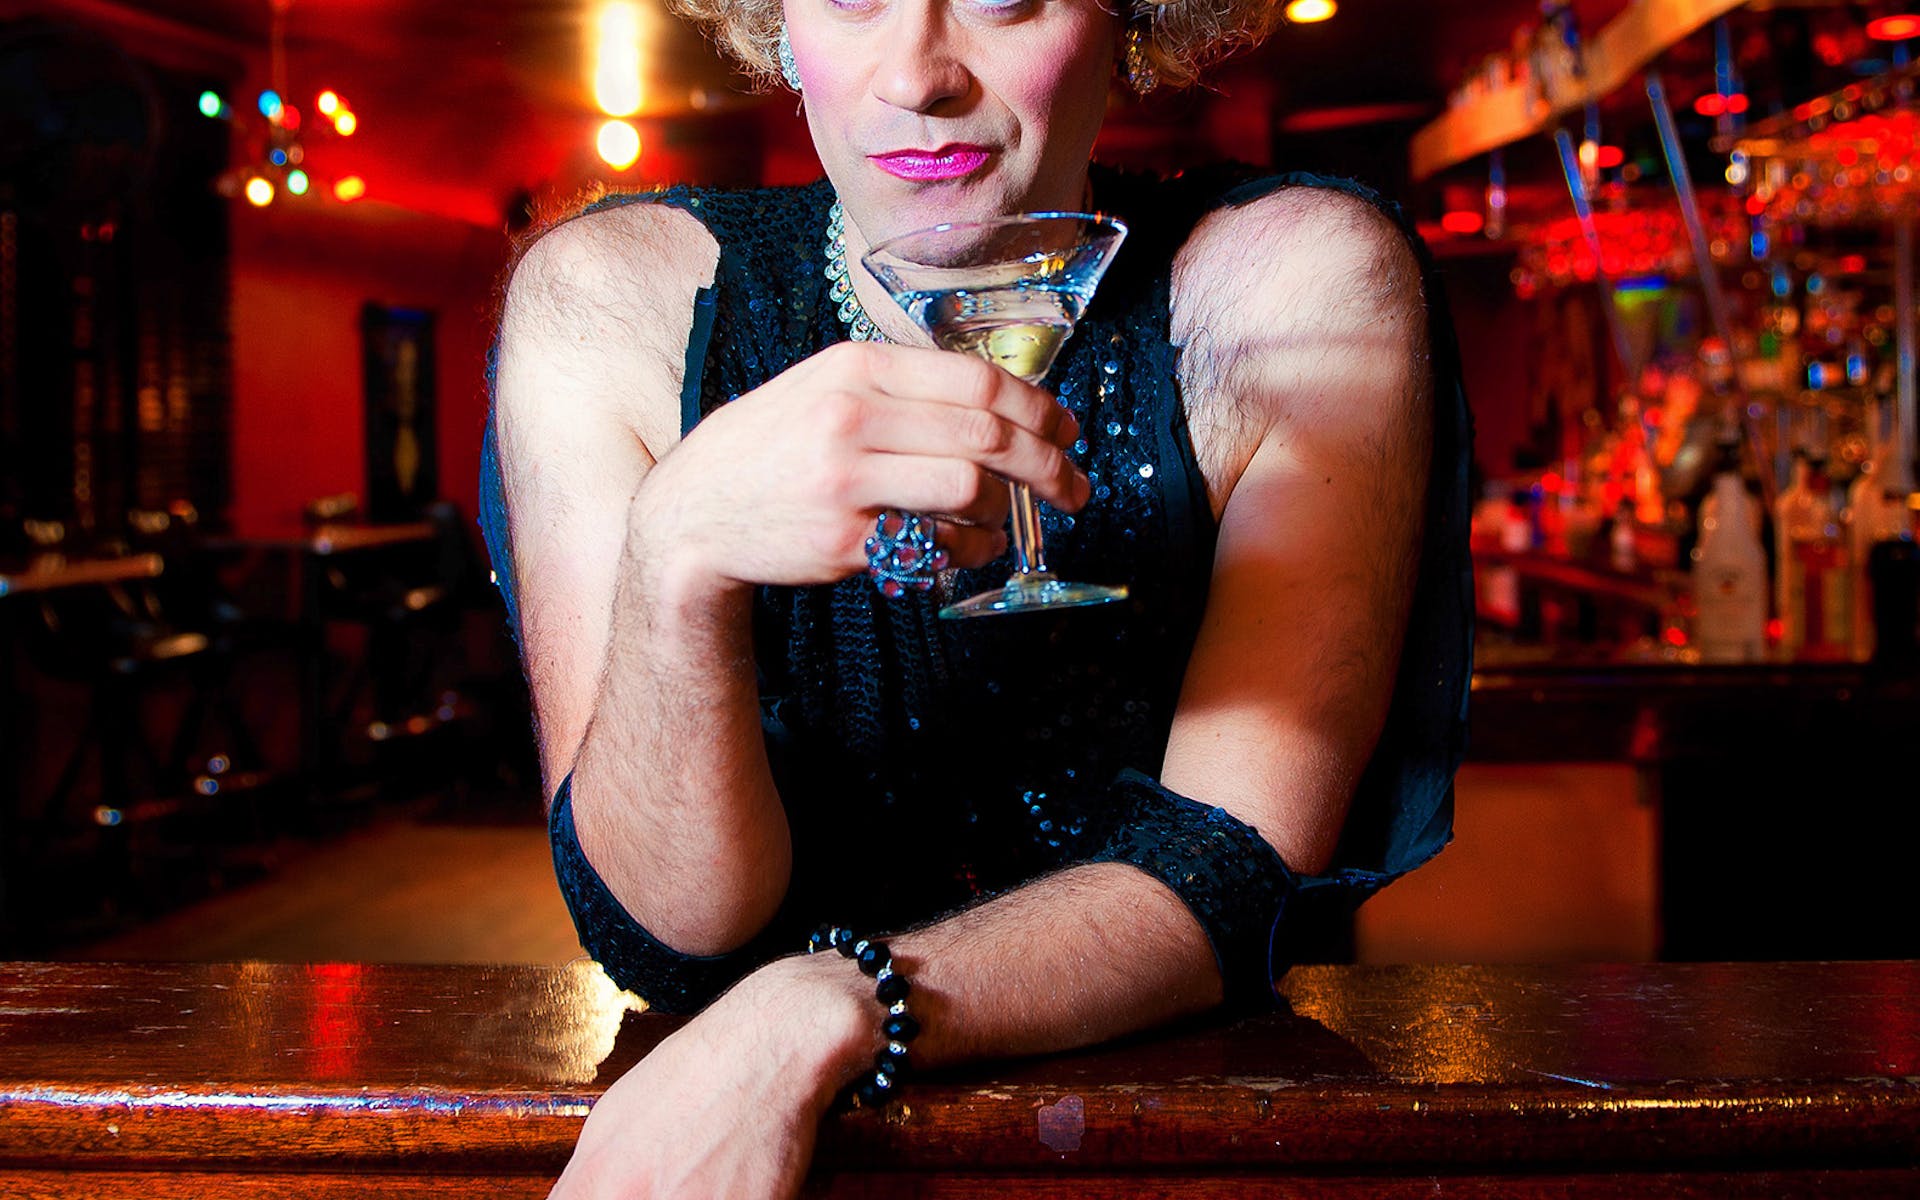 Cross dressed woman in a bar holding drink.